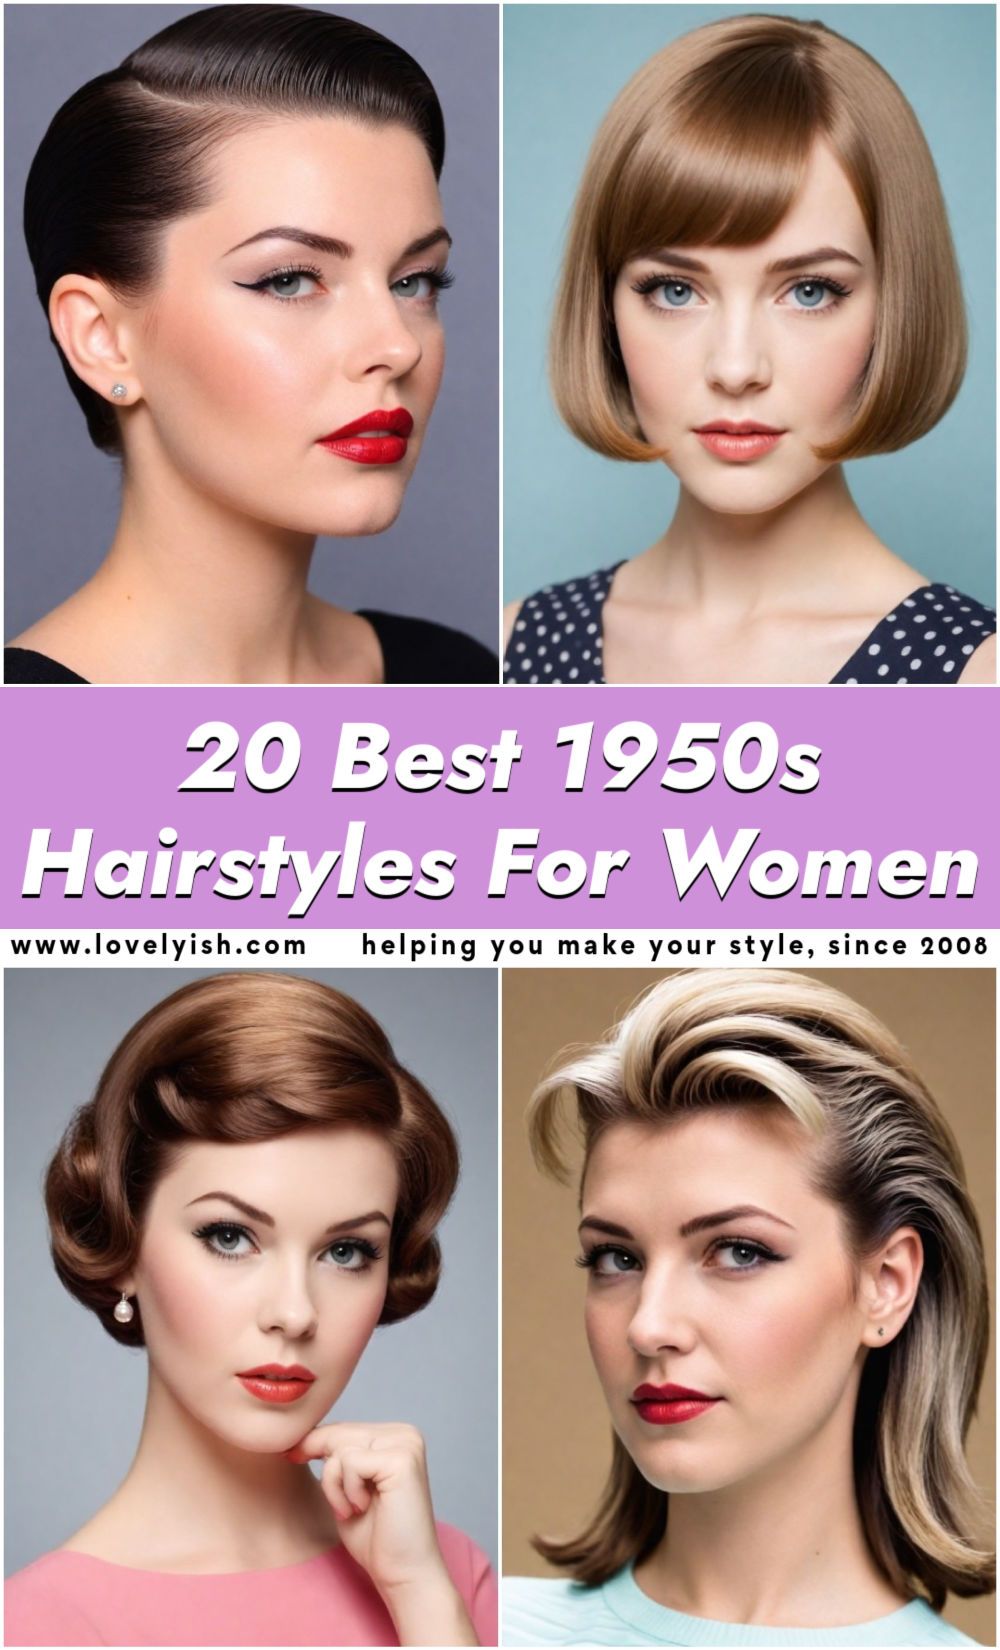 1950s hairstyles for women